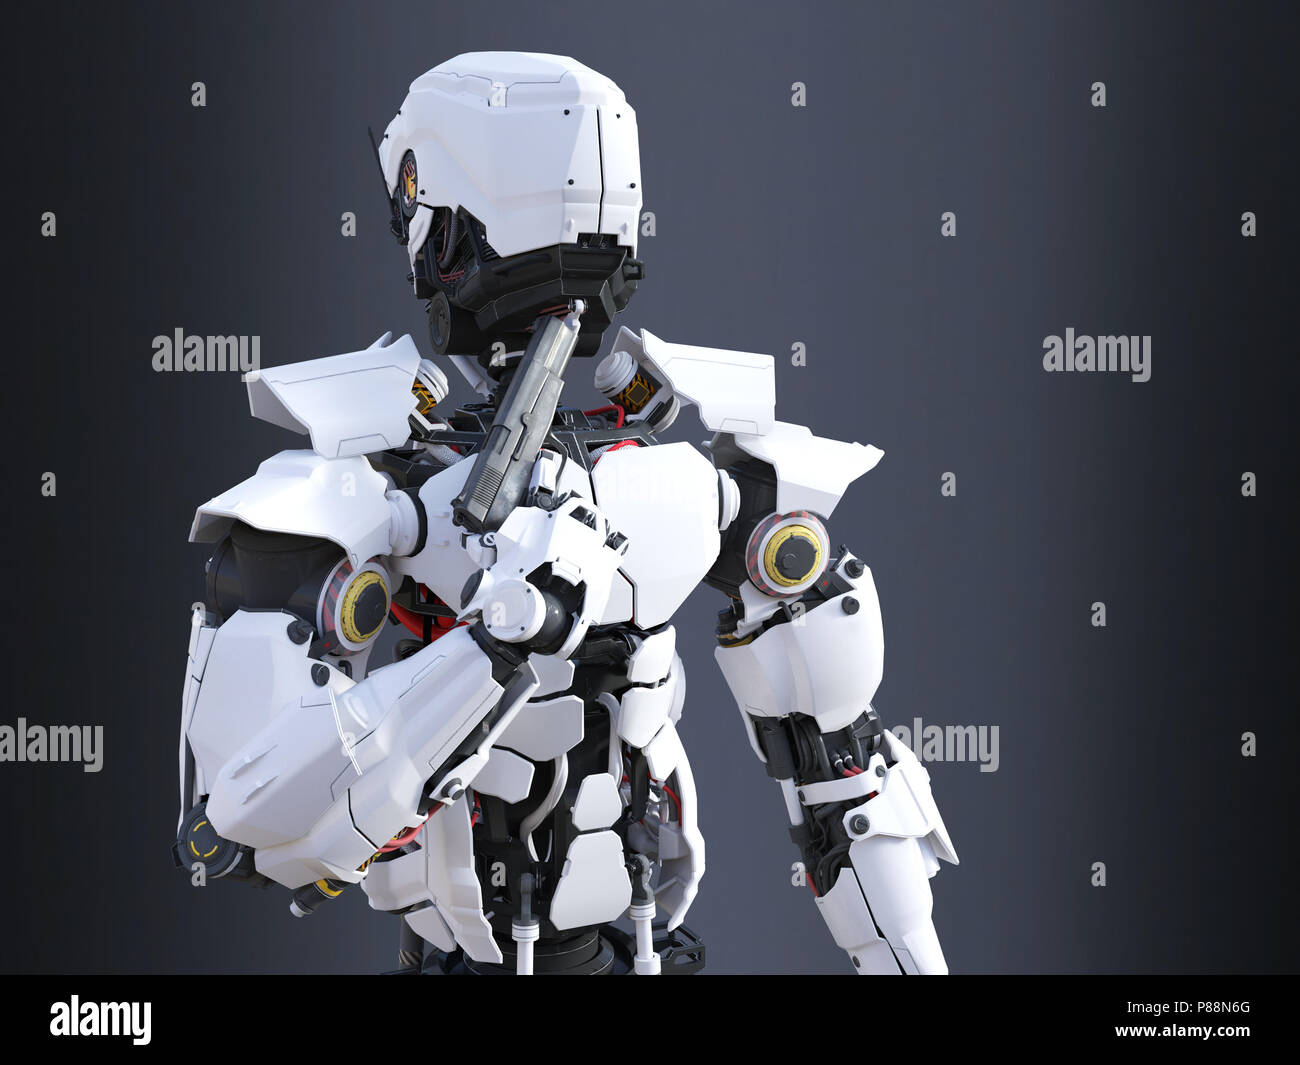 3D rendering of a futuristic robot police or soldier holding a gun to his chin, ready to self-destruct. Dark background. Stock Photo